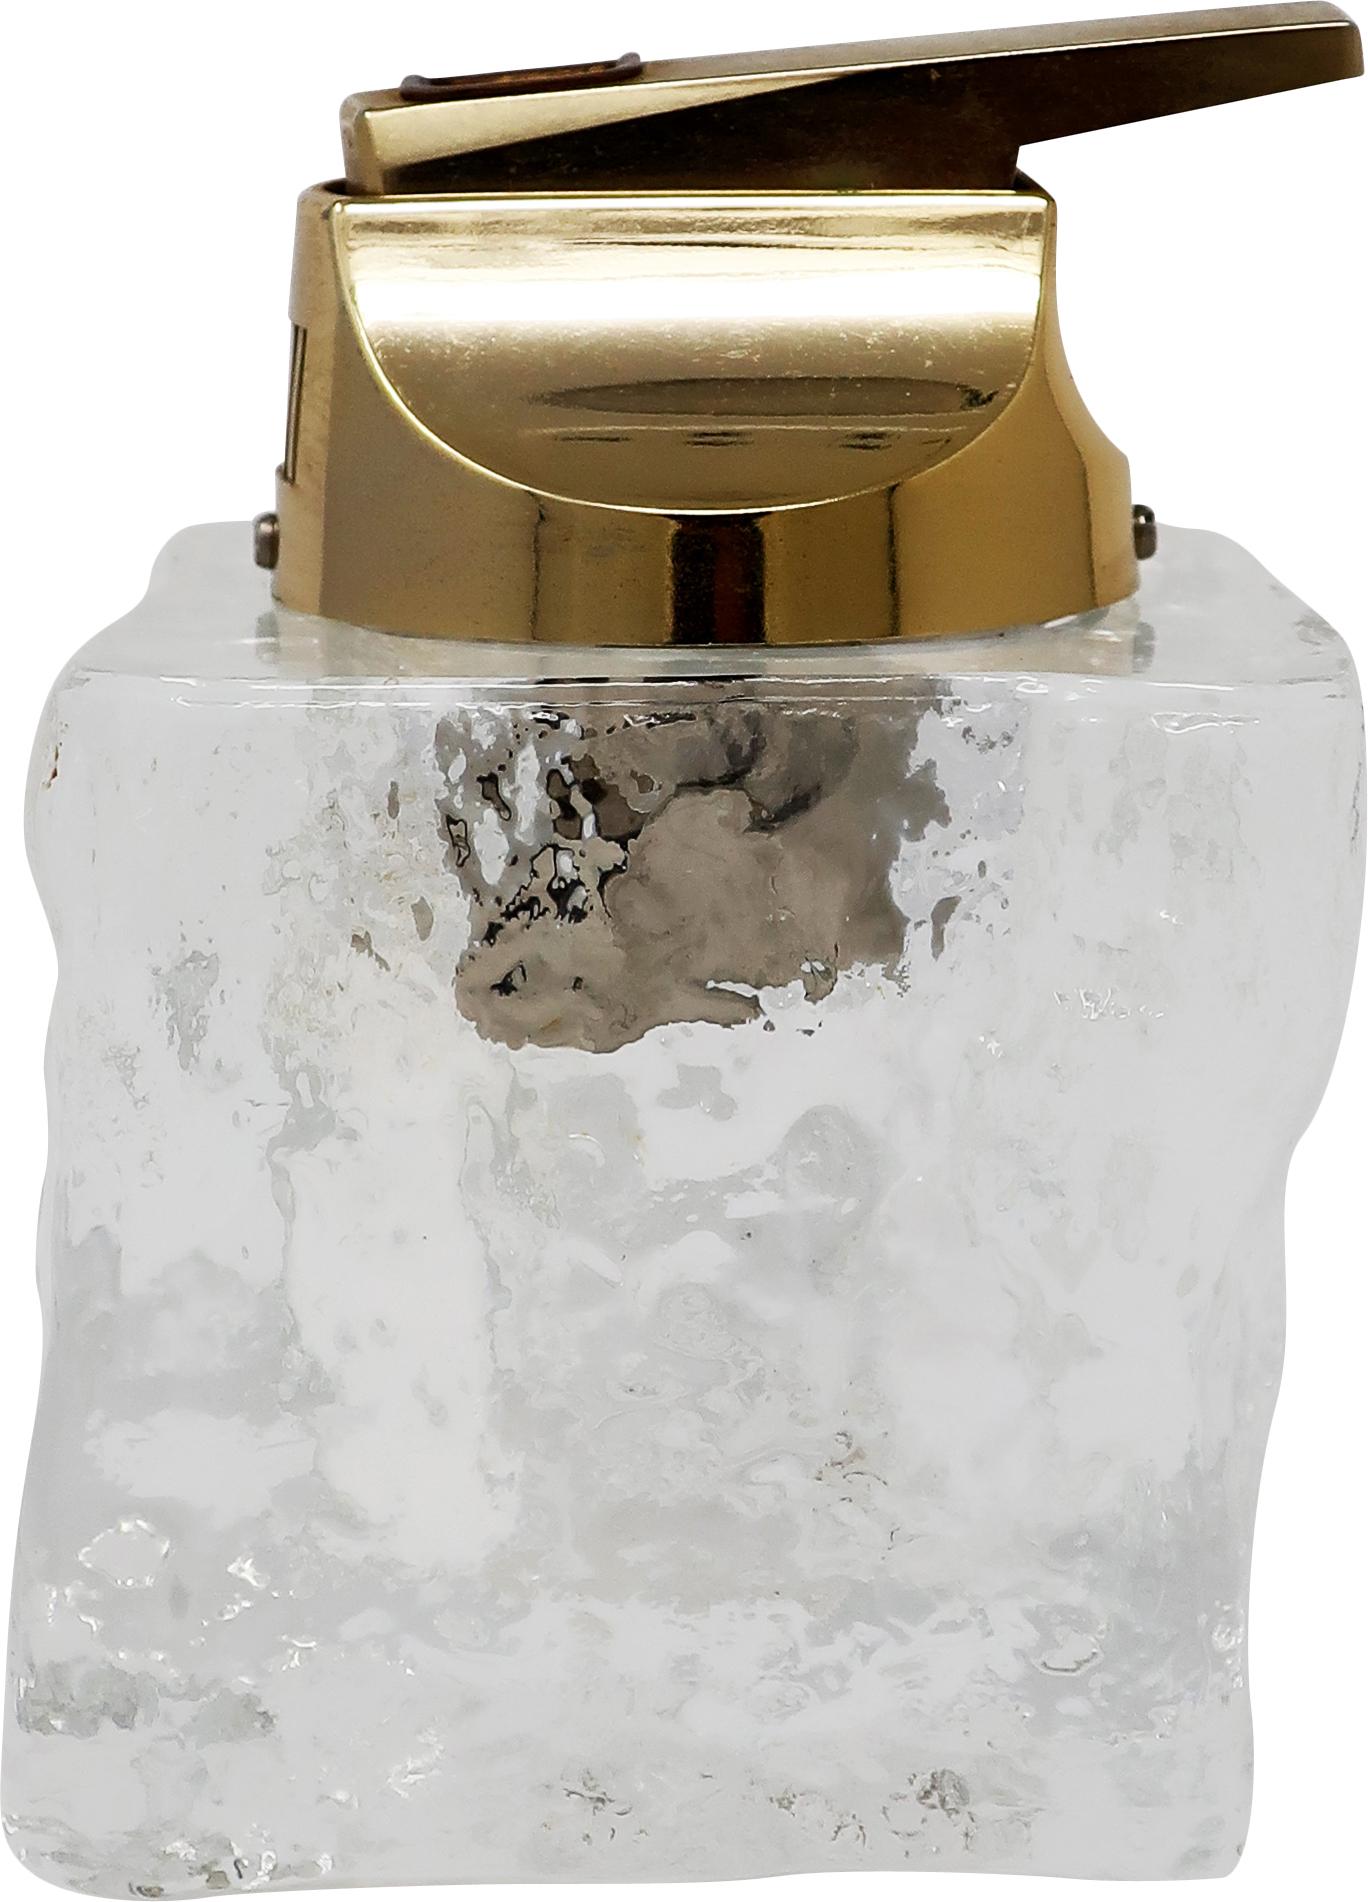 A vintage table lighter with brass colored insert and glass base reminiscent of an ice cube. Hefty yet elegant and will fit beautifully in a Mid-Century Modern or contemporary designed home or office. In excellent vintage condition with no maker’s